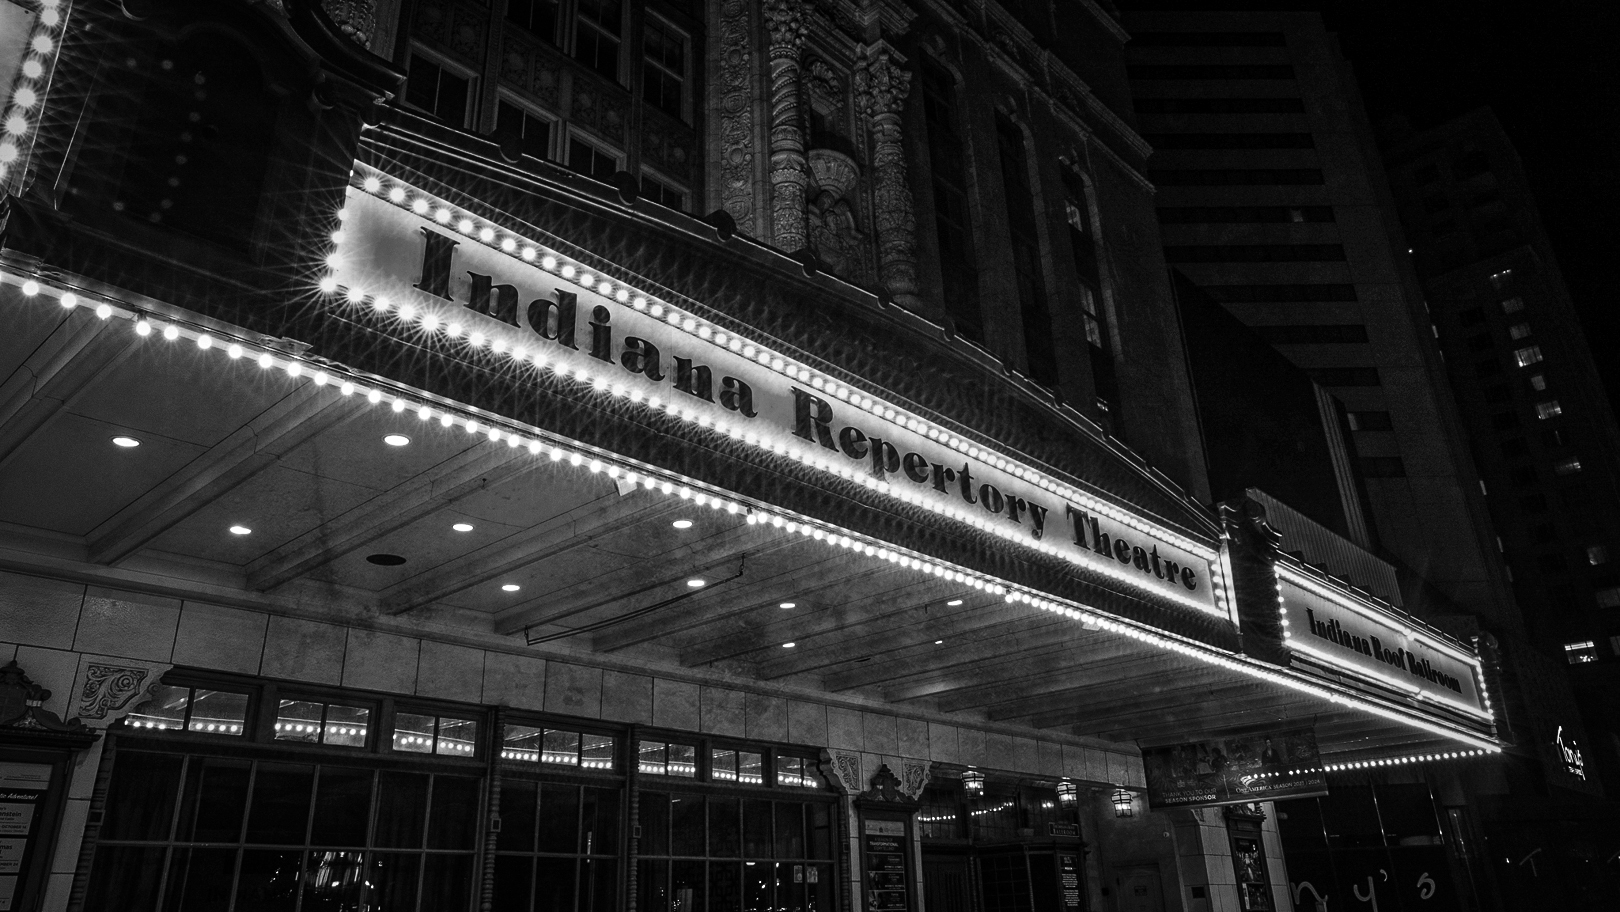 The marquee of the Indiana Repertory Theatre